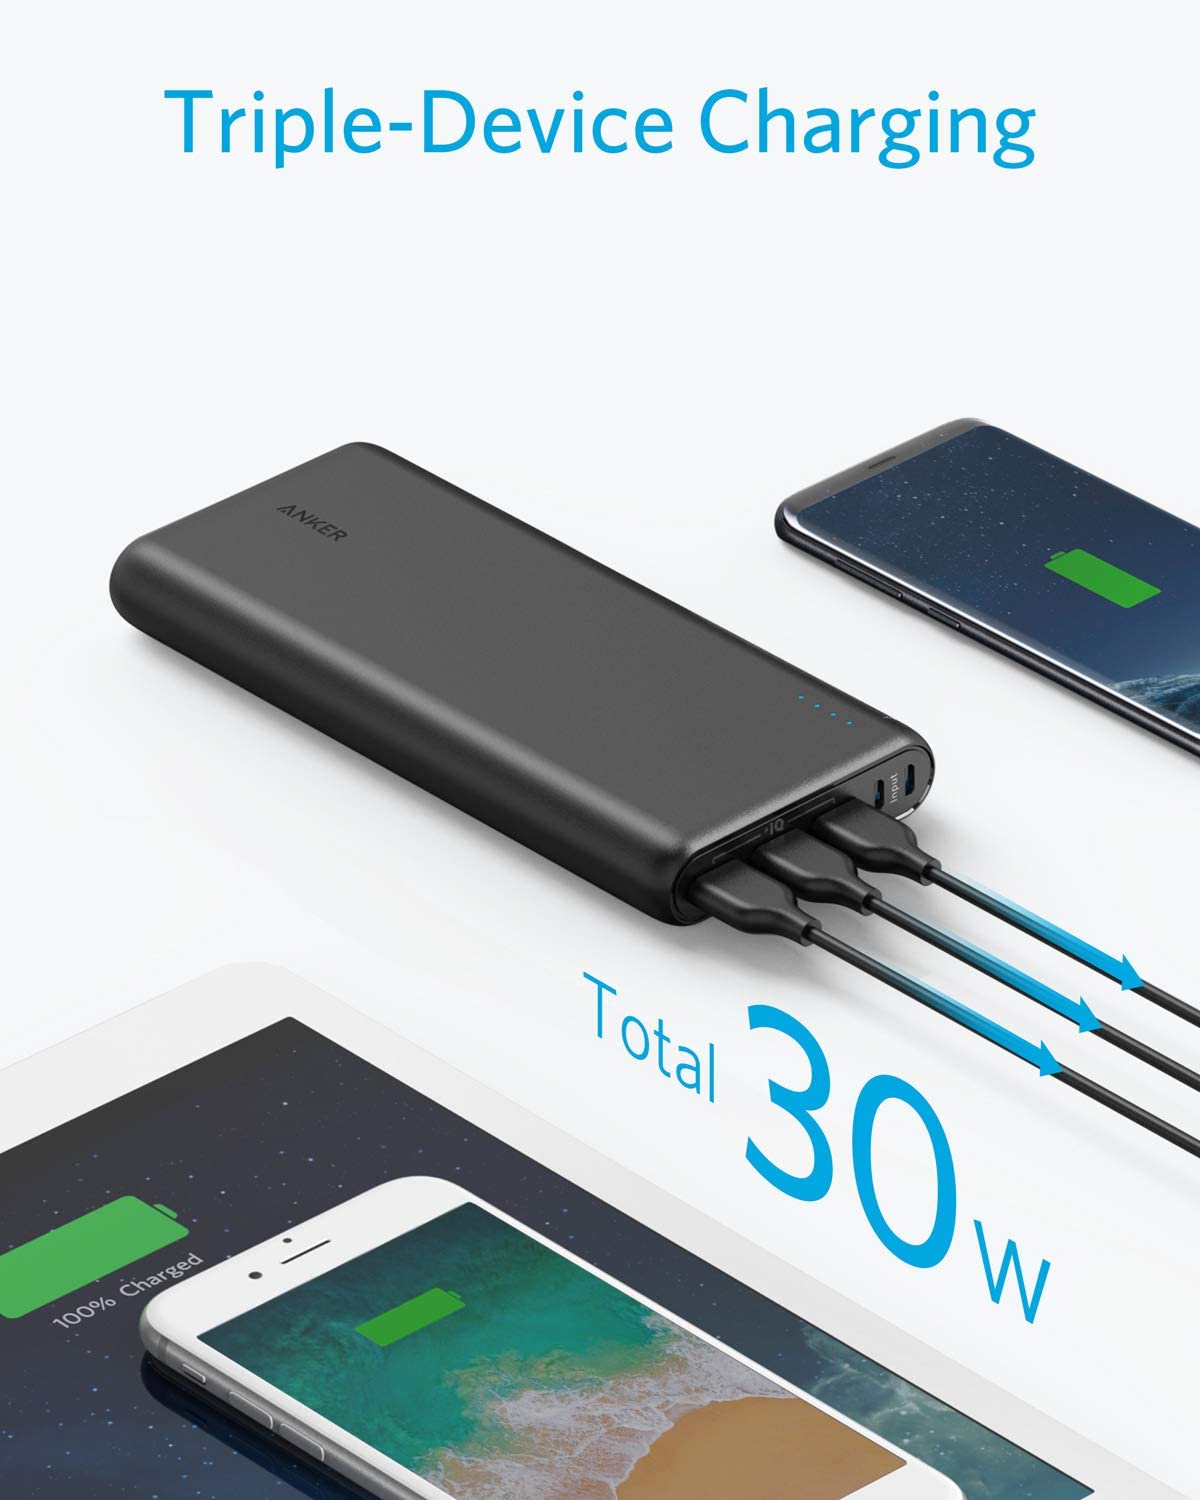 61Hrt5W9 Pl. Ac Sl1500 Anker &Lt;H1&Gt;Anker Astro Powercore 26800Ah&Lt;/H1&Gt; &Lt;Ul&Gt; &Lt;Li&Gt;The Anker Advantage: Join The 50 Million+ Powered By Our Leading Technology.&Lt;/Li&Gt; &Lt;Li&Gt;Colossal Capacity: 26800Mah Of Power Charges Most Phones Over 6 Times, Tablets At Least 2 Times, And Any Other Usb Device Multiple Times.&Lt;/Li&Gt; &Lt;Li&Gt;High-Speed Charging: 3 Usb Output Ports Equipped With Anker'S Poweriq And Voltage Boost Technology Ensure High-Speed Charging For Three Devices—Simultaneously (Not Compatible With Qualcomm Quick Charge).&Lt;/Li&Gt; &Lt;Li&Gt;Recharge 2X Faster: Dual Micro Usb (20W) Input Offers Recharge Speeds Up To Twice As Fast As Standard Portable Chargers—A Full Recharge Takes Just Over 6 Hours While Using Both Input Ports (Wall Charger Not Included).&Lt;/Li&Gt; &Lt;Li&Gt;What You Get: Power Core 26800, 2X Micro Usb Cable, Travel Pouch, Welcome Guide, Anker Worry-Free 18-Month, And Friendly Customer Service. Usb-C Cable And Lightning Cable For Iphone/ Ipad Sold Separately.&Lt;/Li&Gt; &Lt;/Ul&Gt; [Video Width=&Quot;720&Quot; Height=&Quot;404&Quot; Mp4=&Quot;Https://Lablaab.com/Wp-Content/Uploads/2020/06/C1S5Otzqjws.mp4&Quot;][/Video] Anker Astro Powercore 26800Ah Anker Astro Powercore 26800Ah